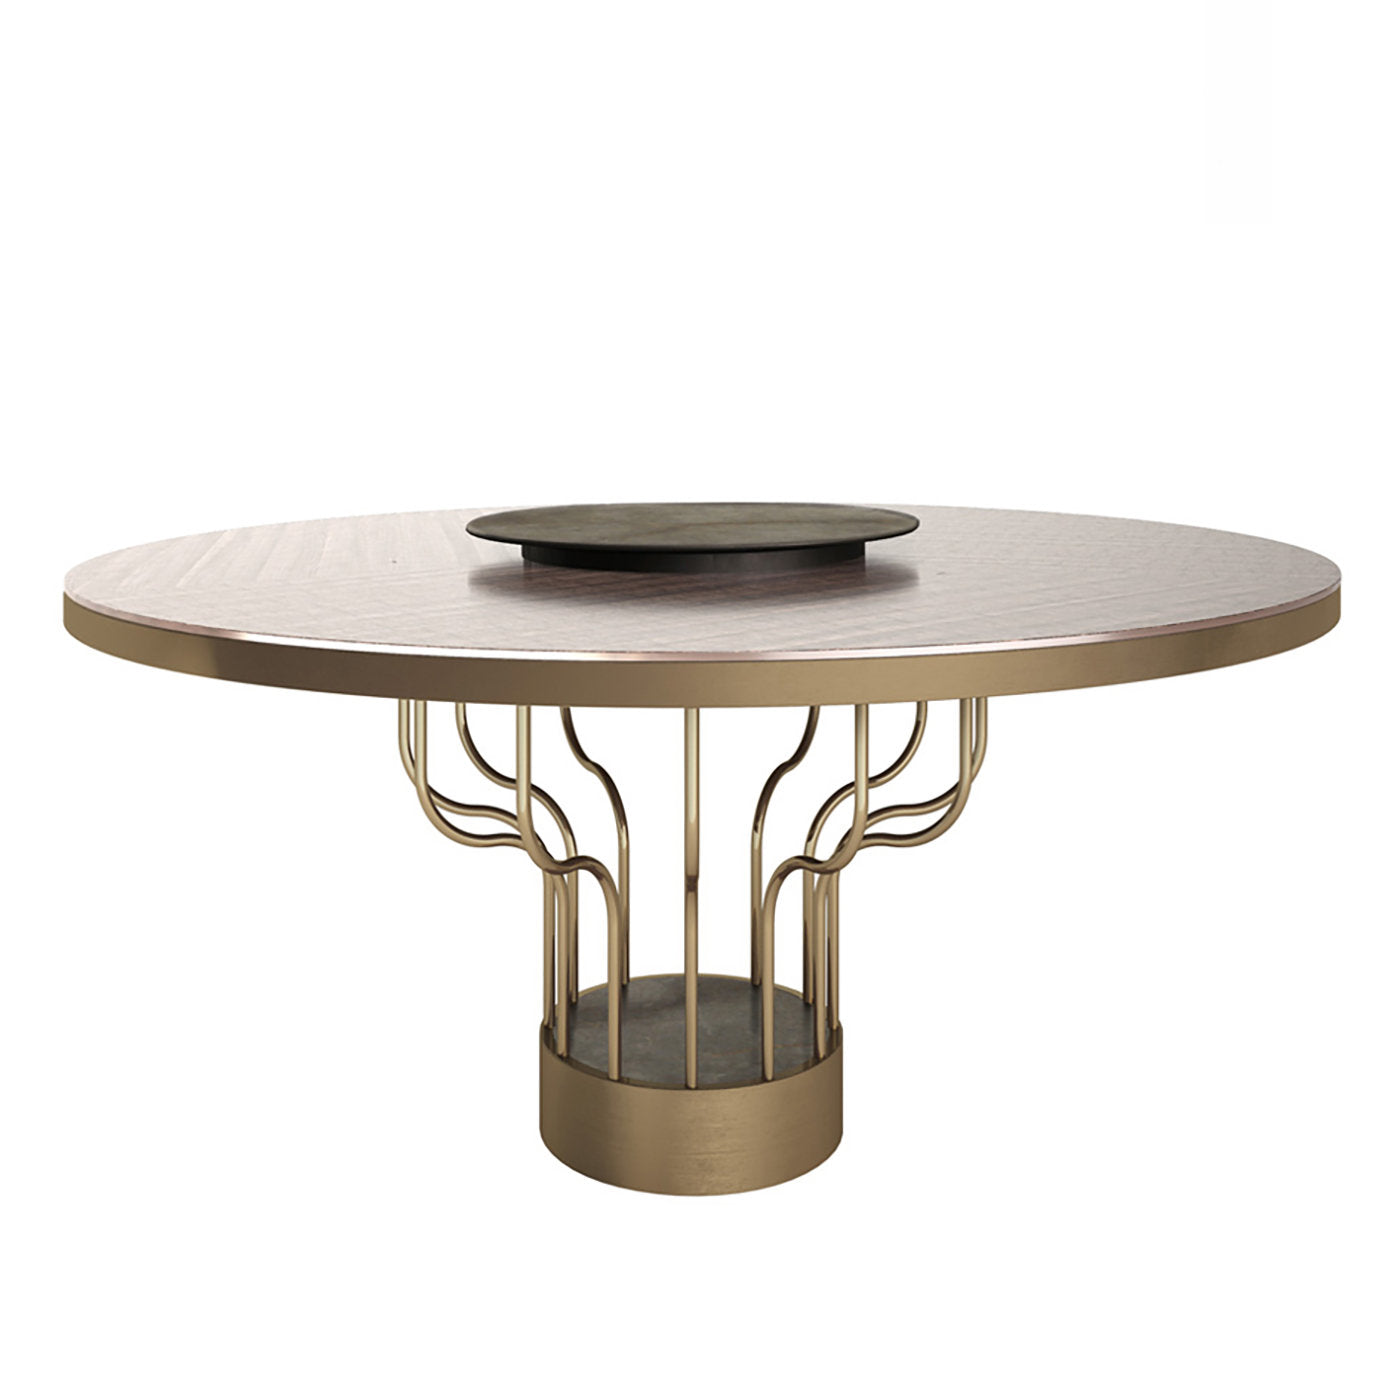 Bloom Round Dining Table - Alternative view 1